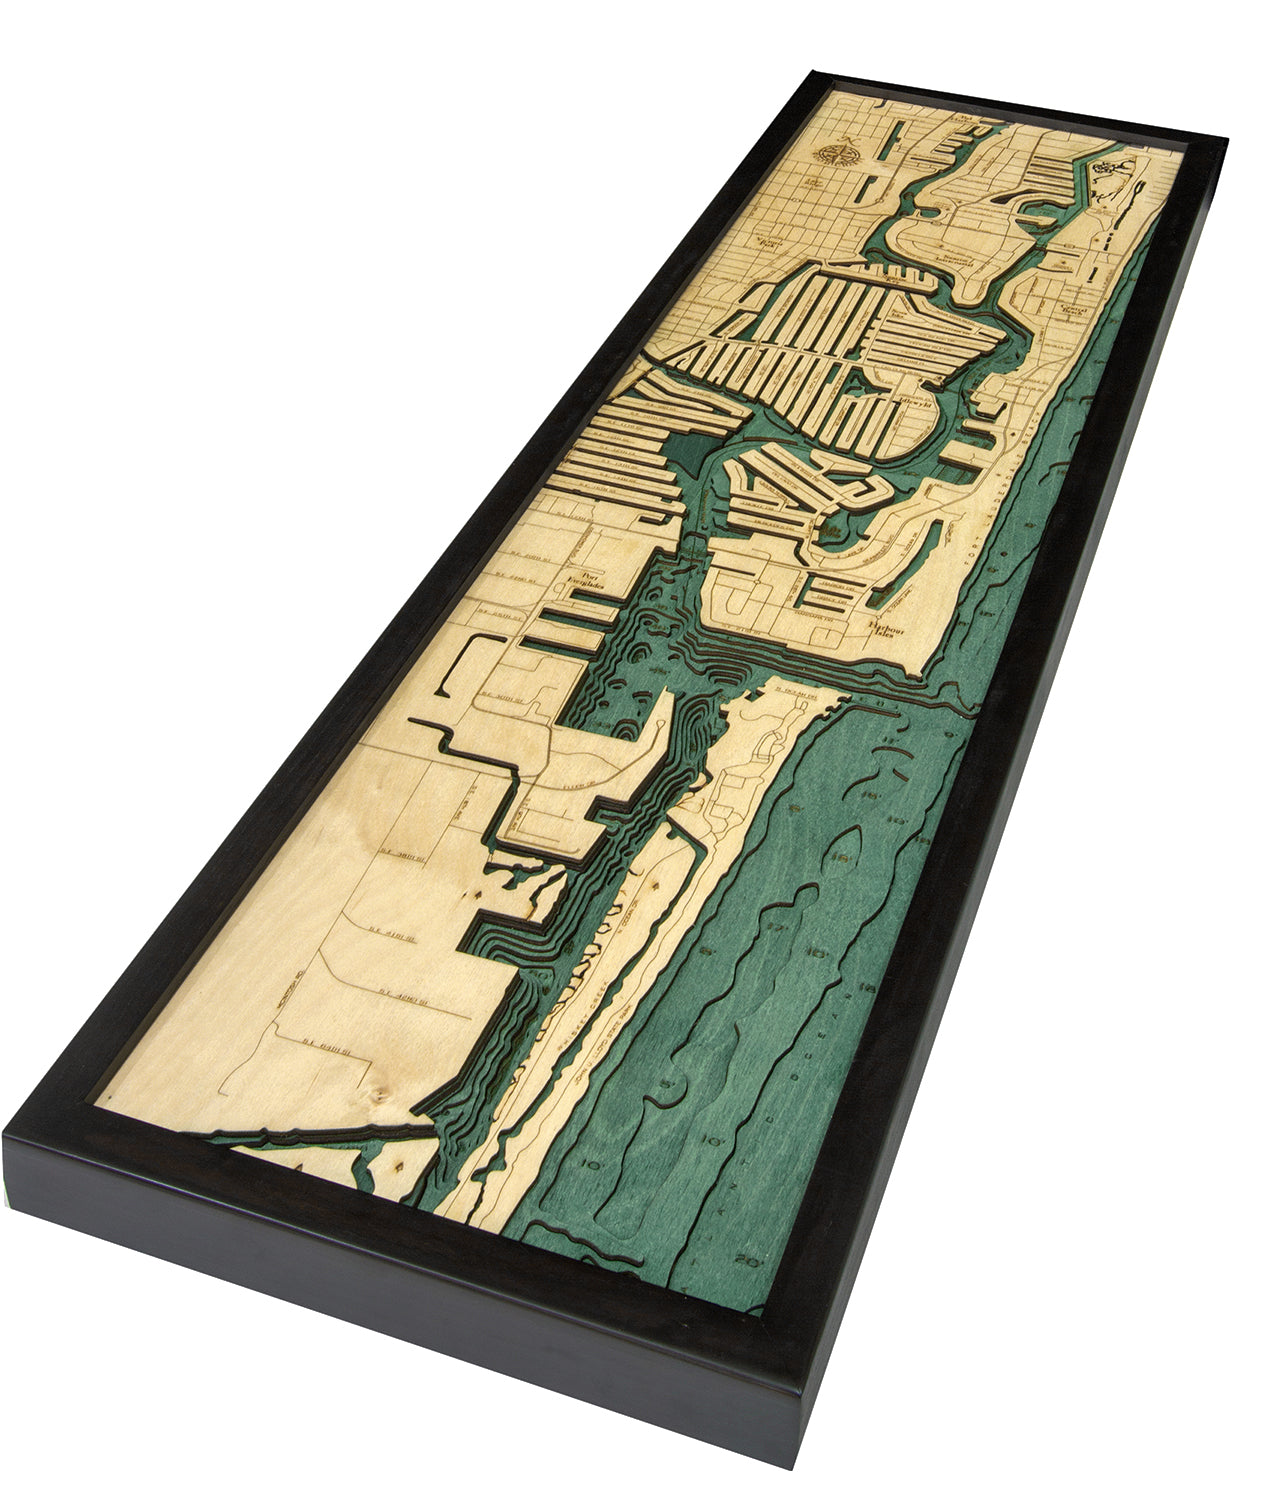 Fort Lauderdale, Florida wood chart map made using green and natural colored wood on white background with dark frame laying flat